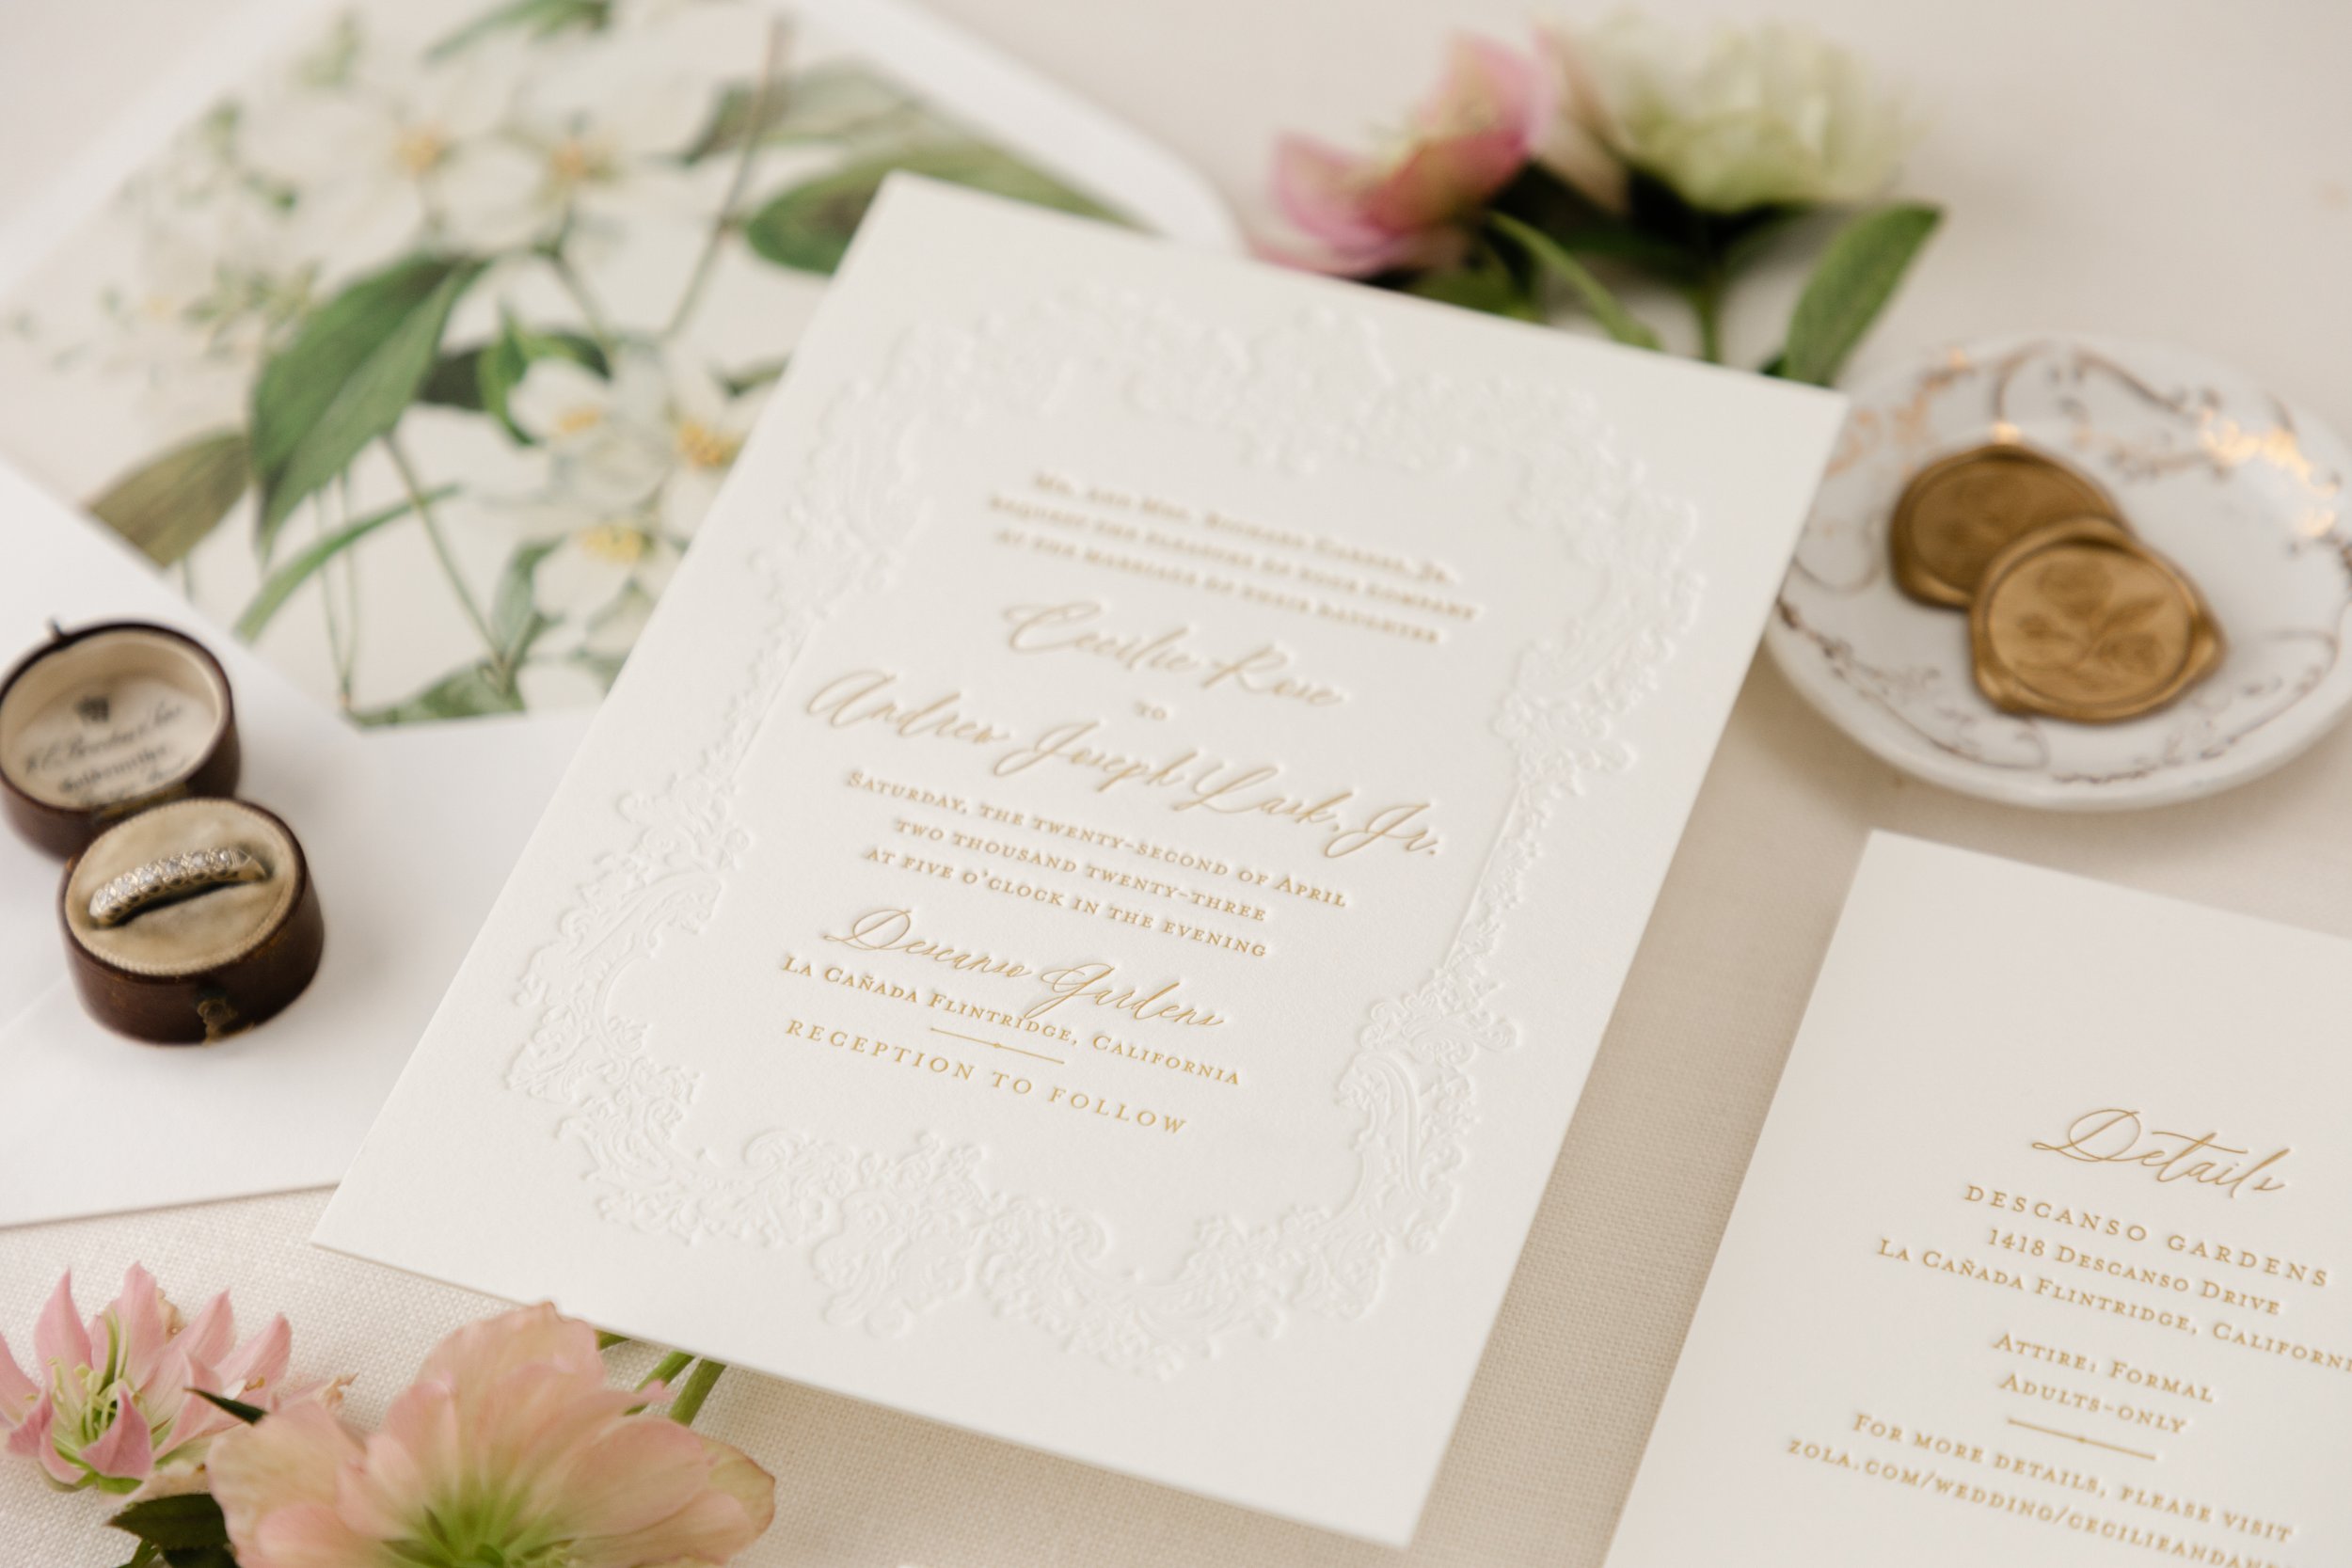 Save the date: when and how to announce your wedding